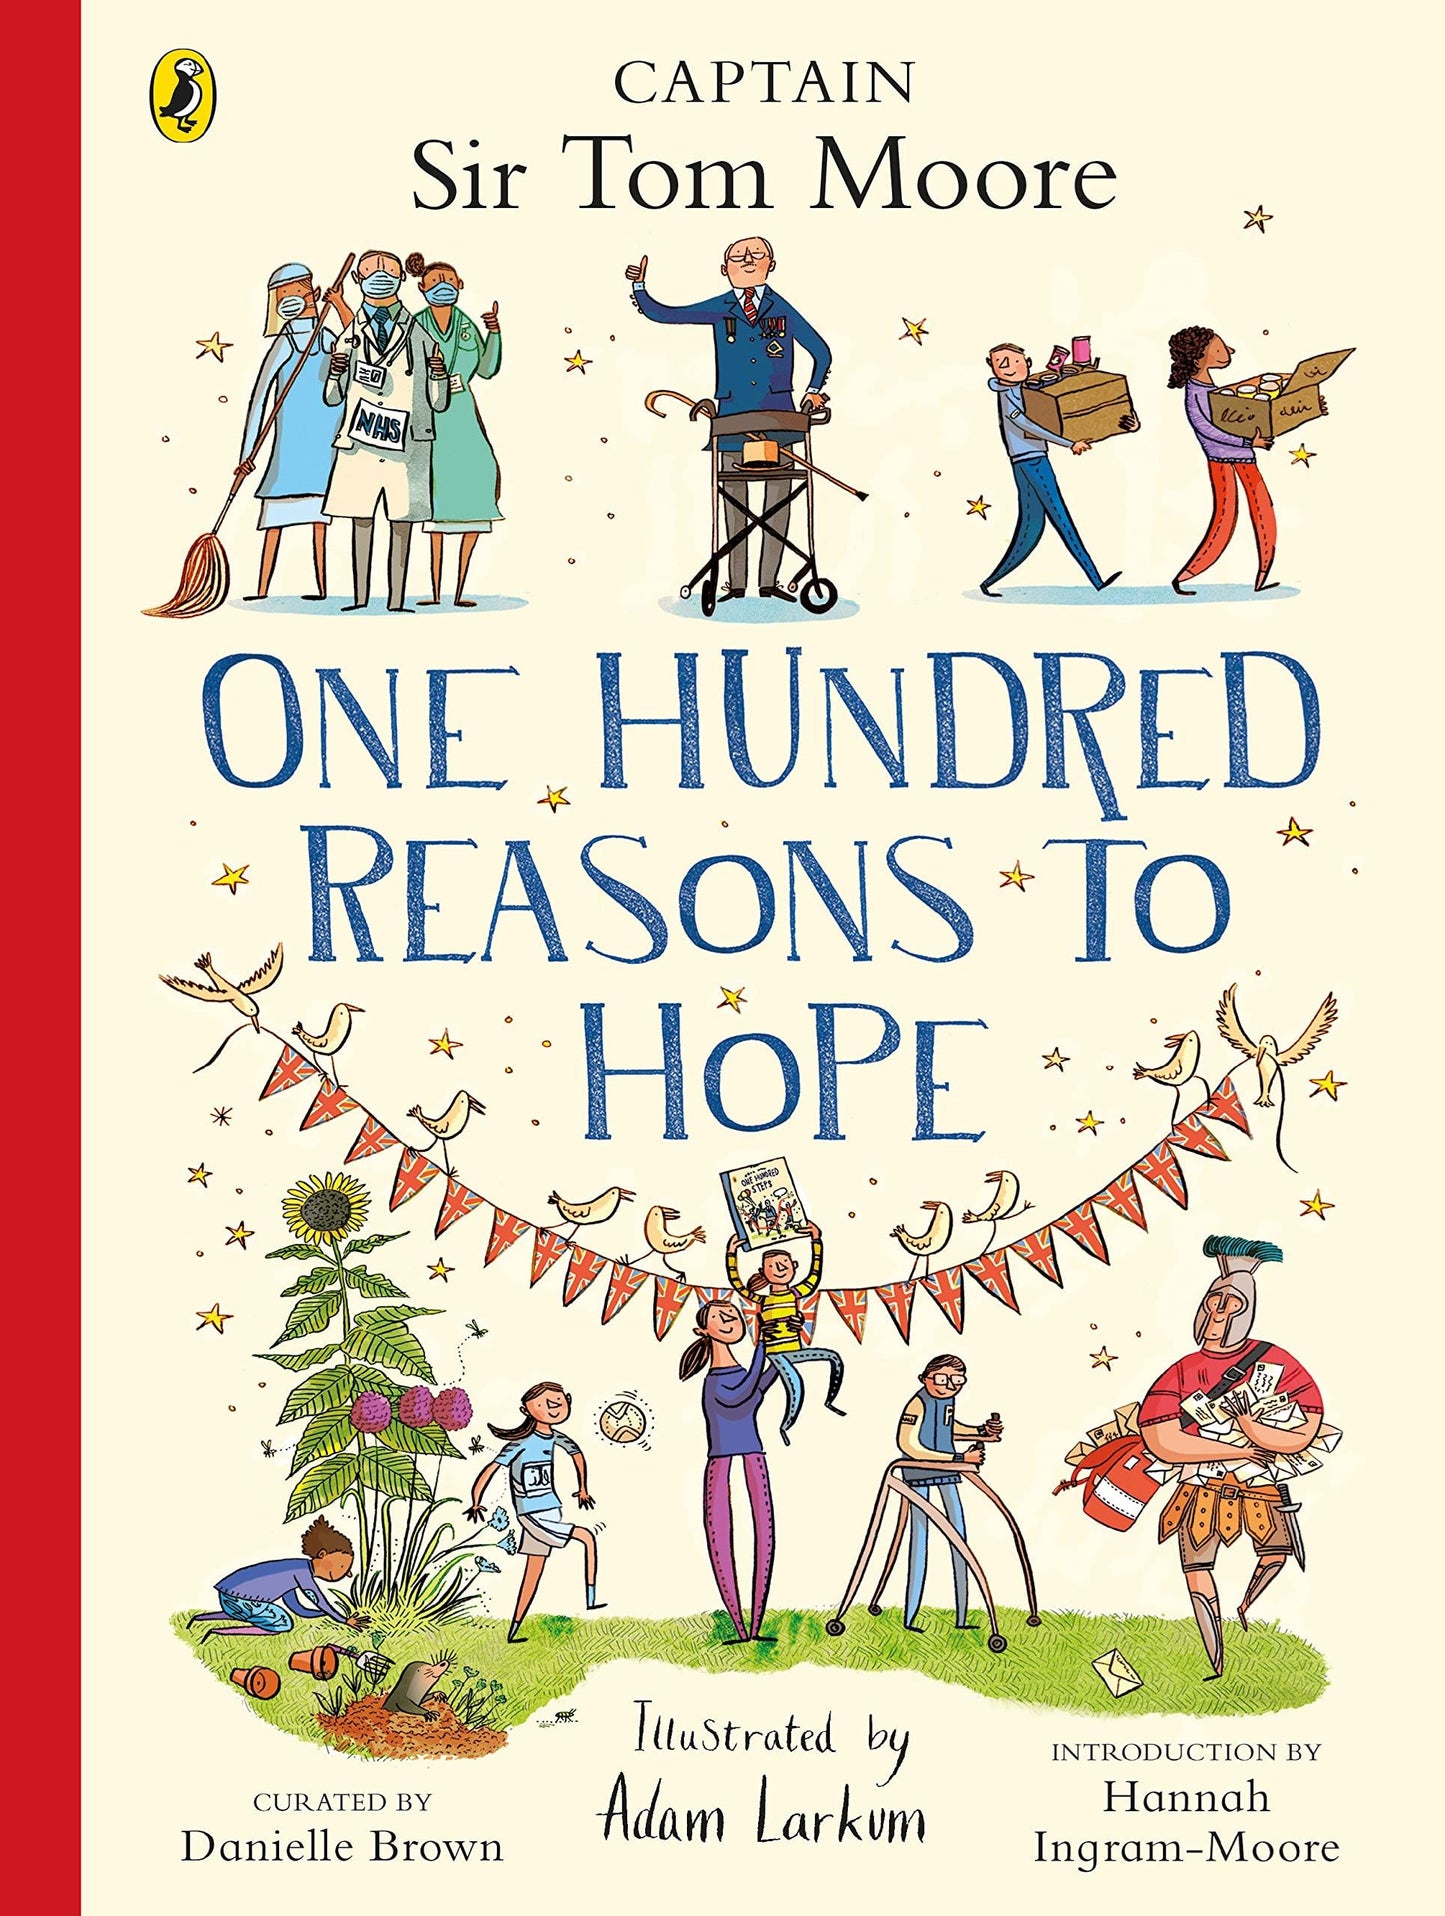 One Hundred Reasons to Hope - Captain Sir Tom Moore